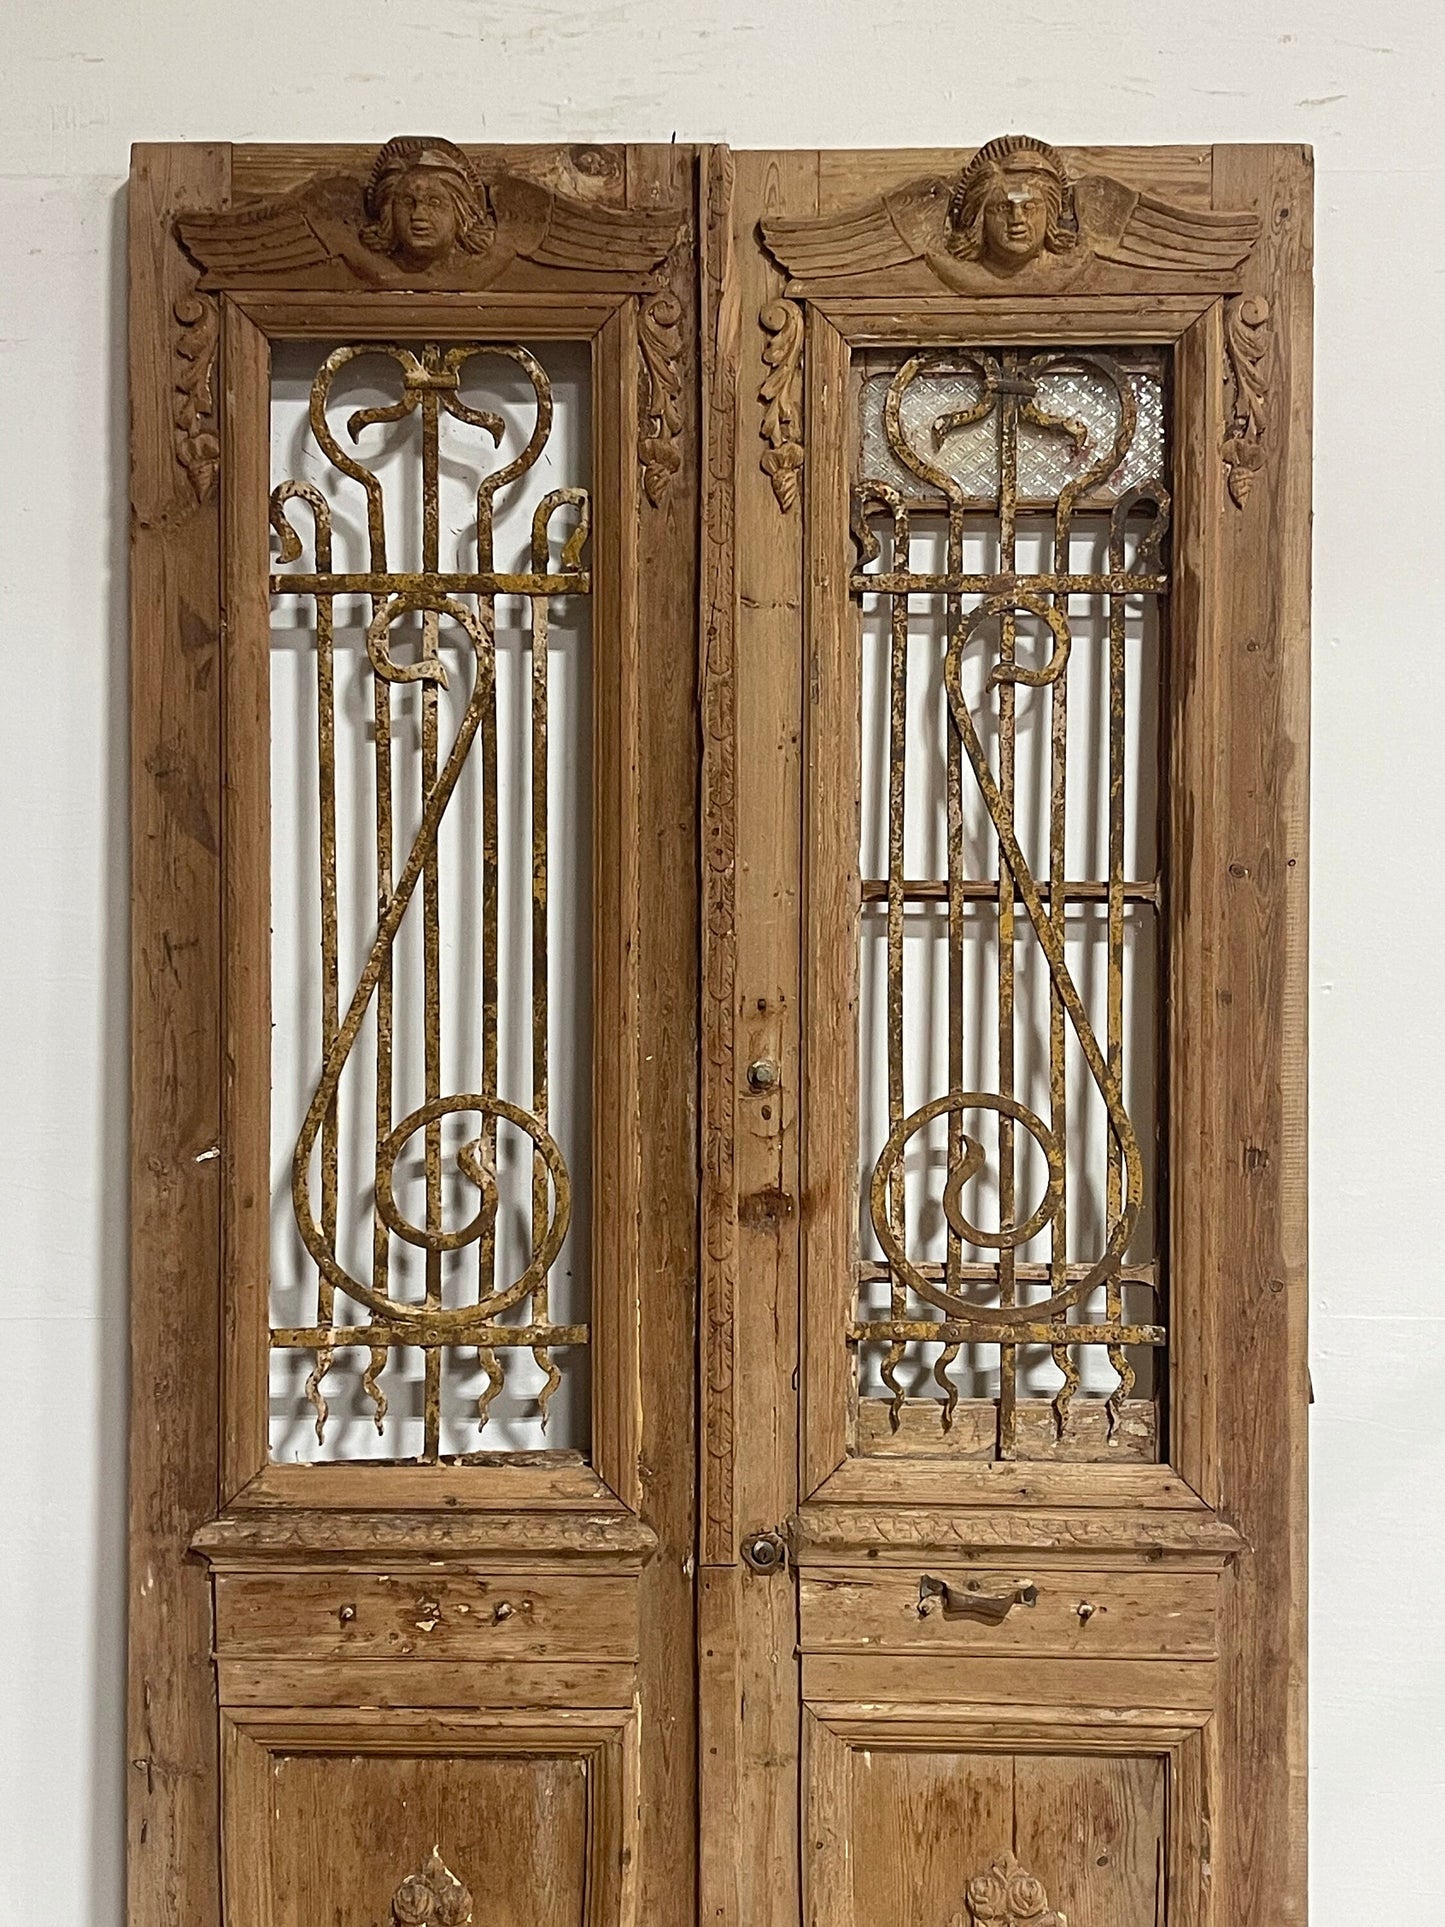 Antique French panel doors with metal (96.5x48.25) H0024As